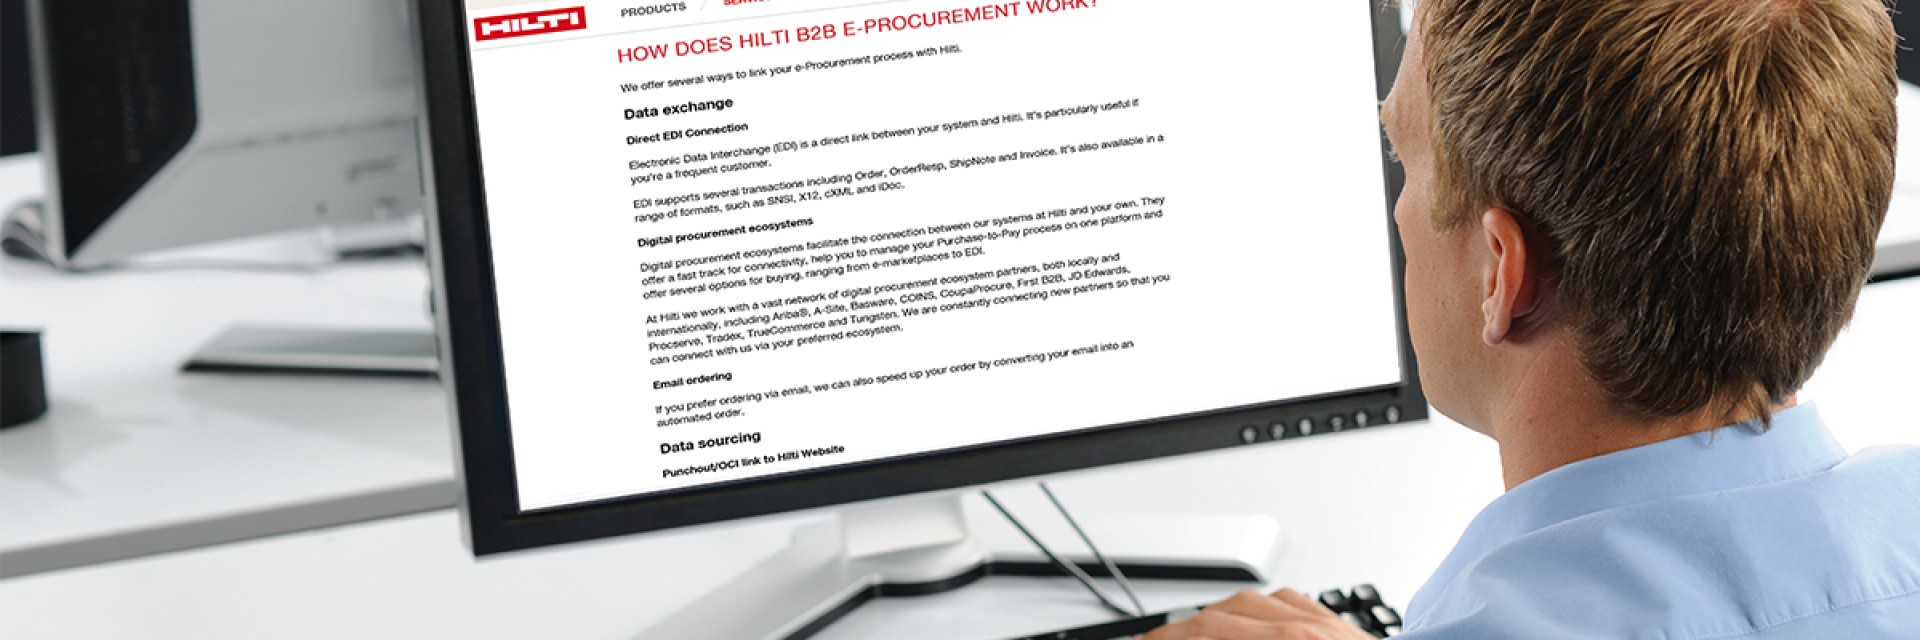 E-procurement and email ordering